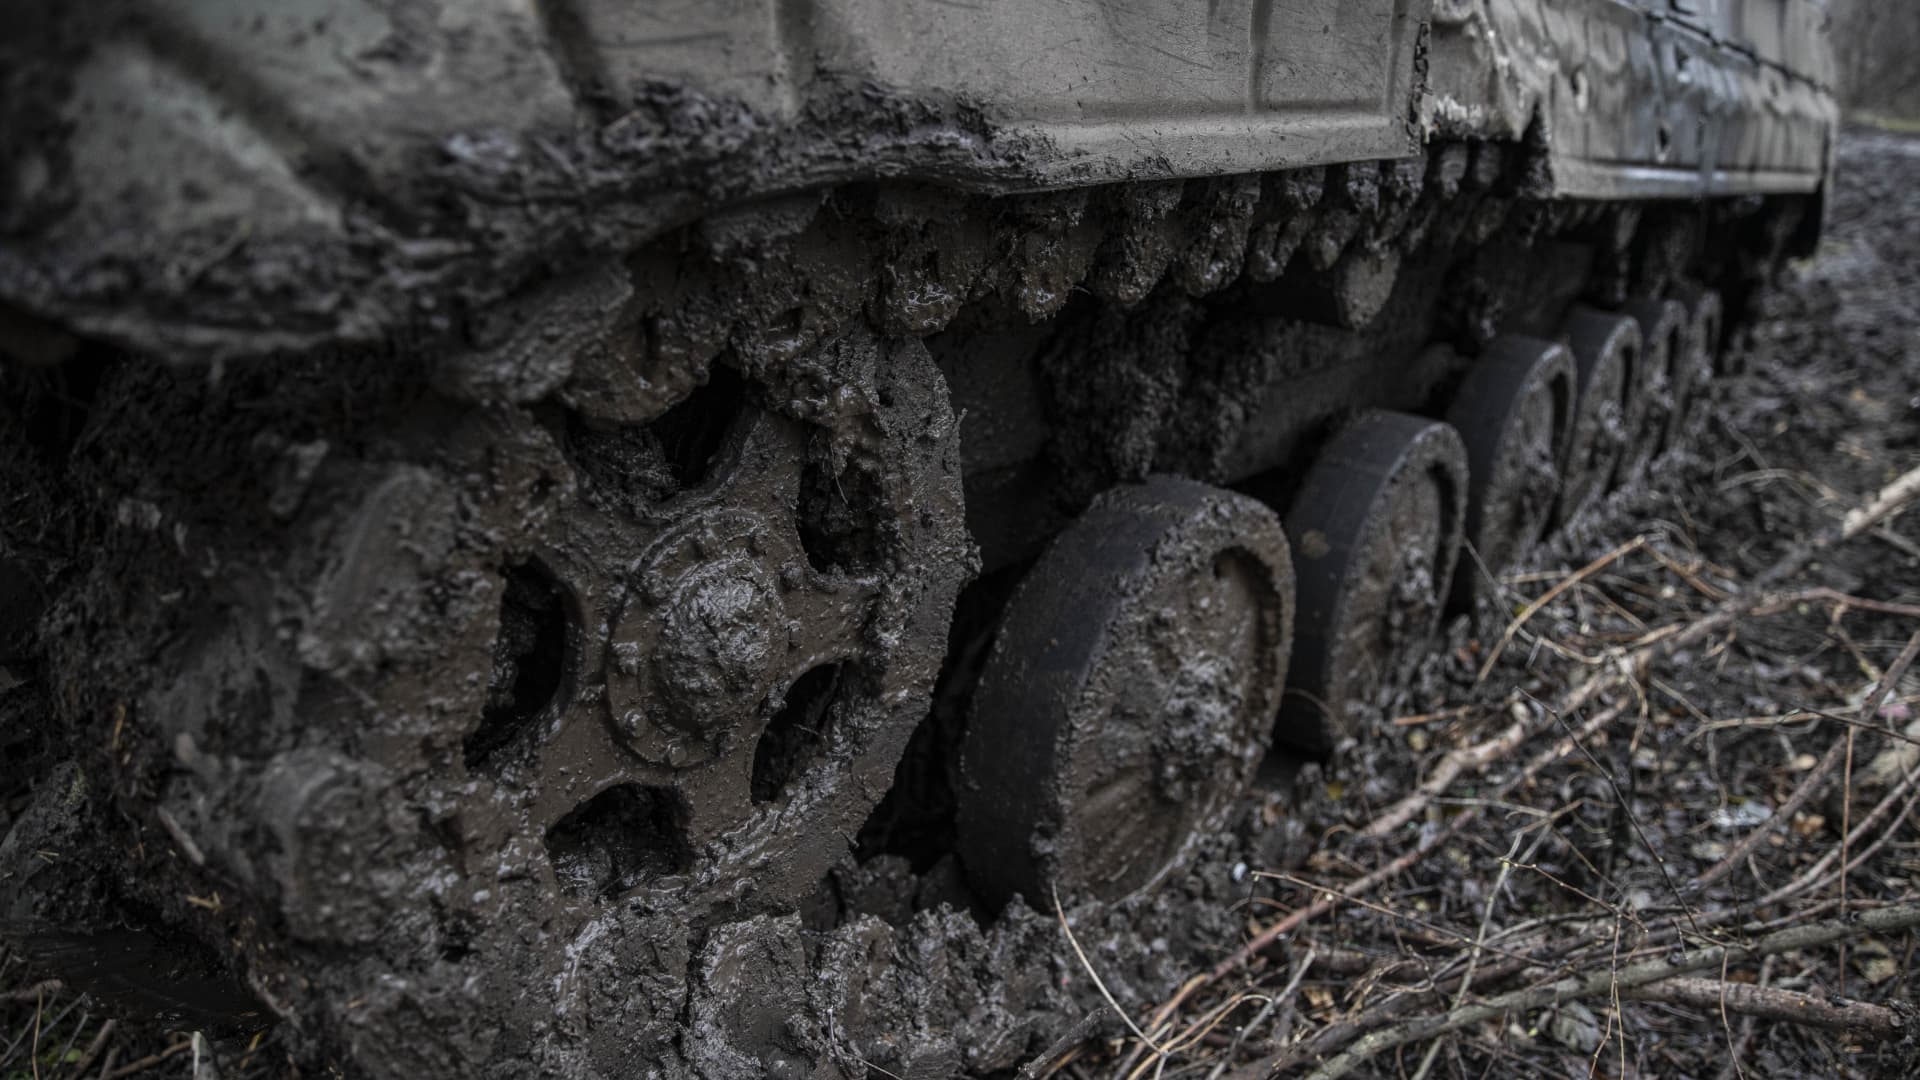 A close-up view of a tank's muddy steel plates in Donetsk Oblast, Ukraine on November 28, 2022. As the war between Russia and Ukraine continues, rainy and cold weather conditions create difficulties for the soldiers in Donetsk Oblast, where the most intense conflicts take place.